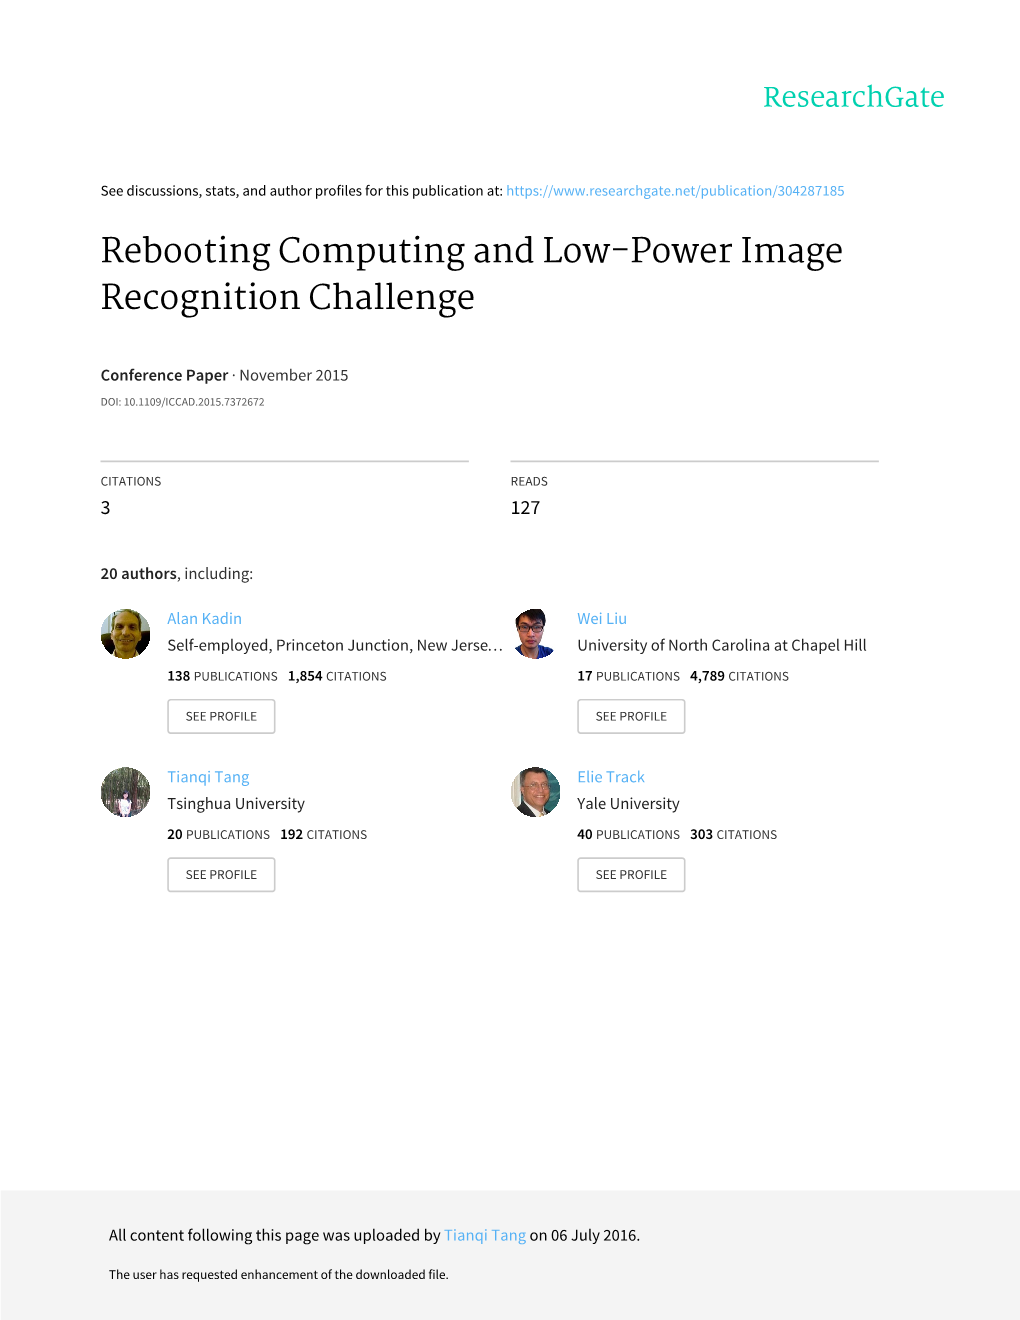 Rebooting Computing and Low-Power Image Recognition Challenge